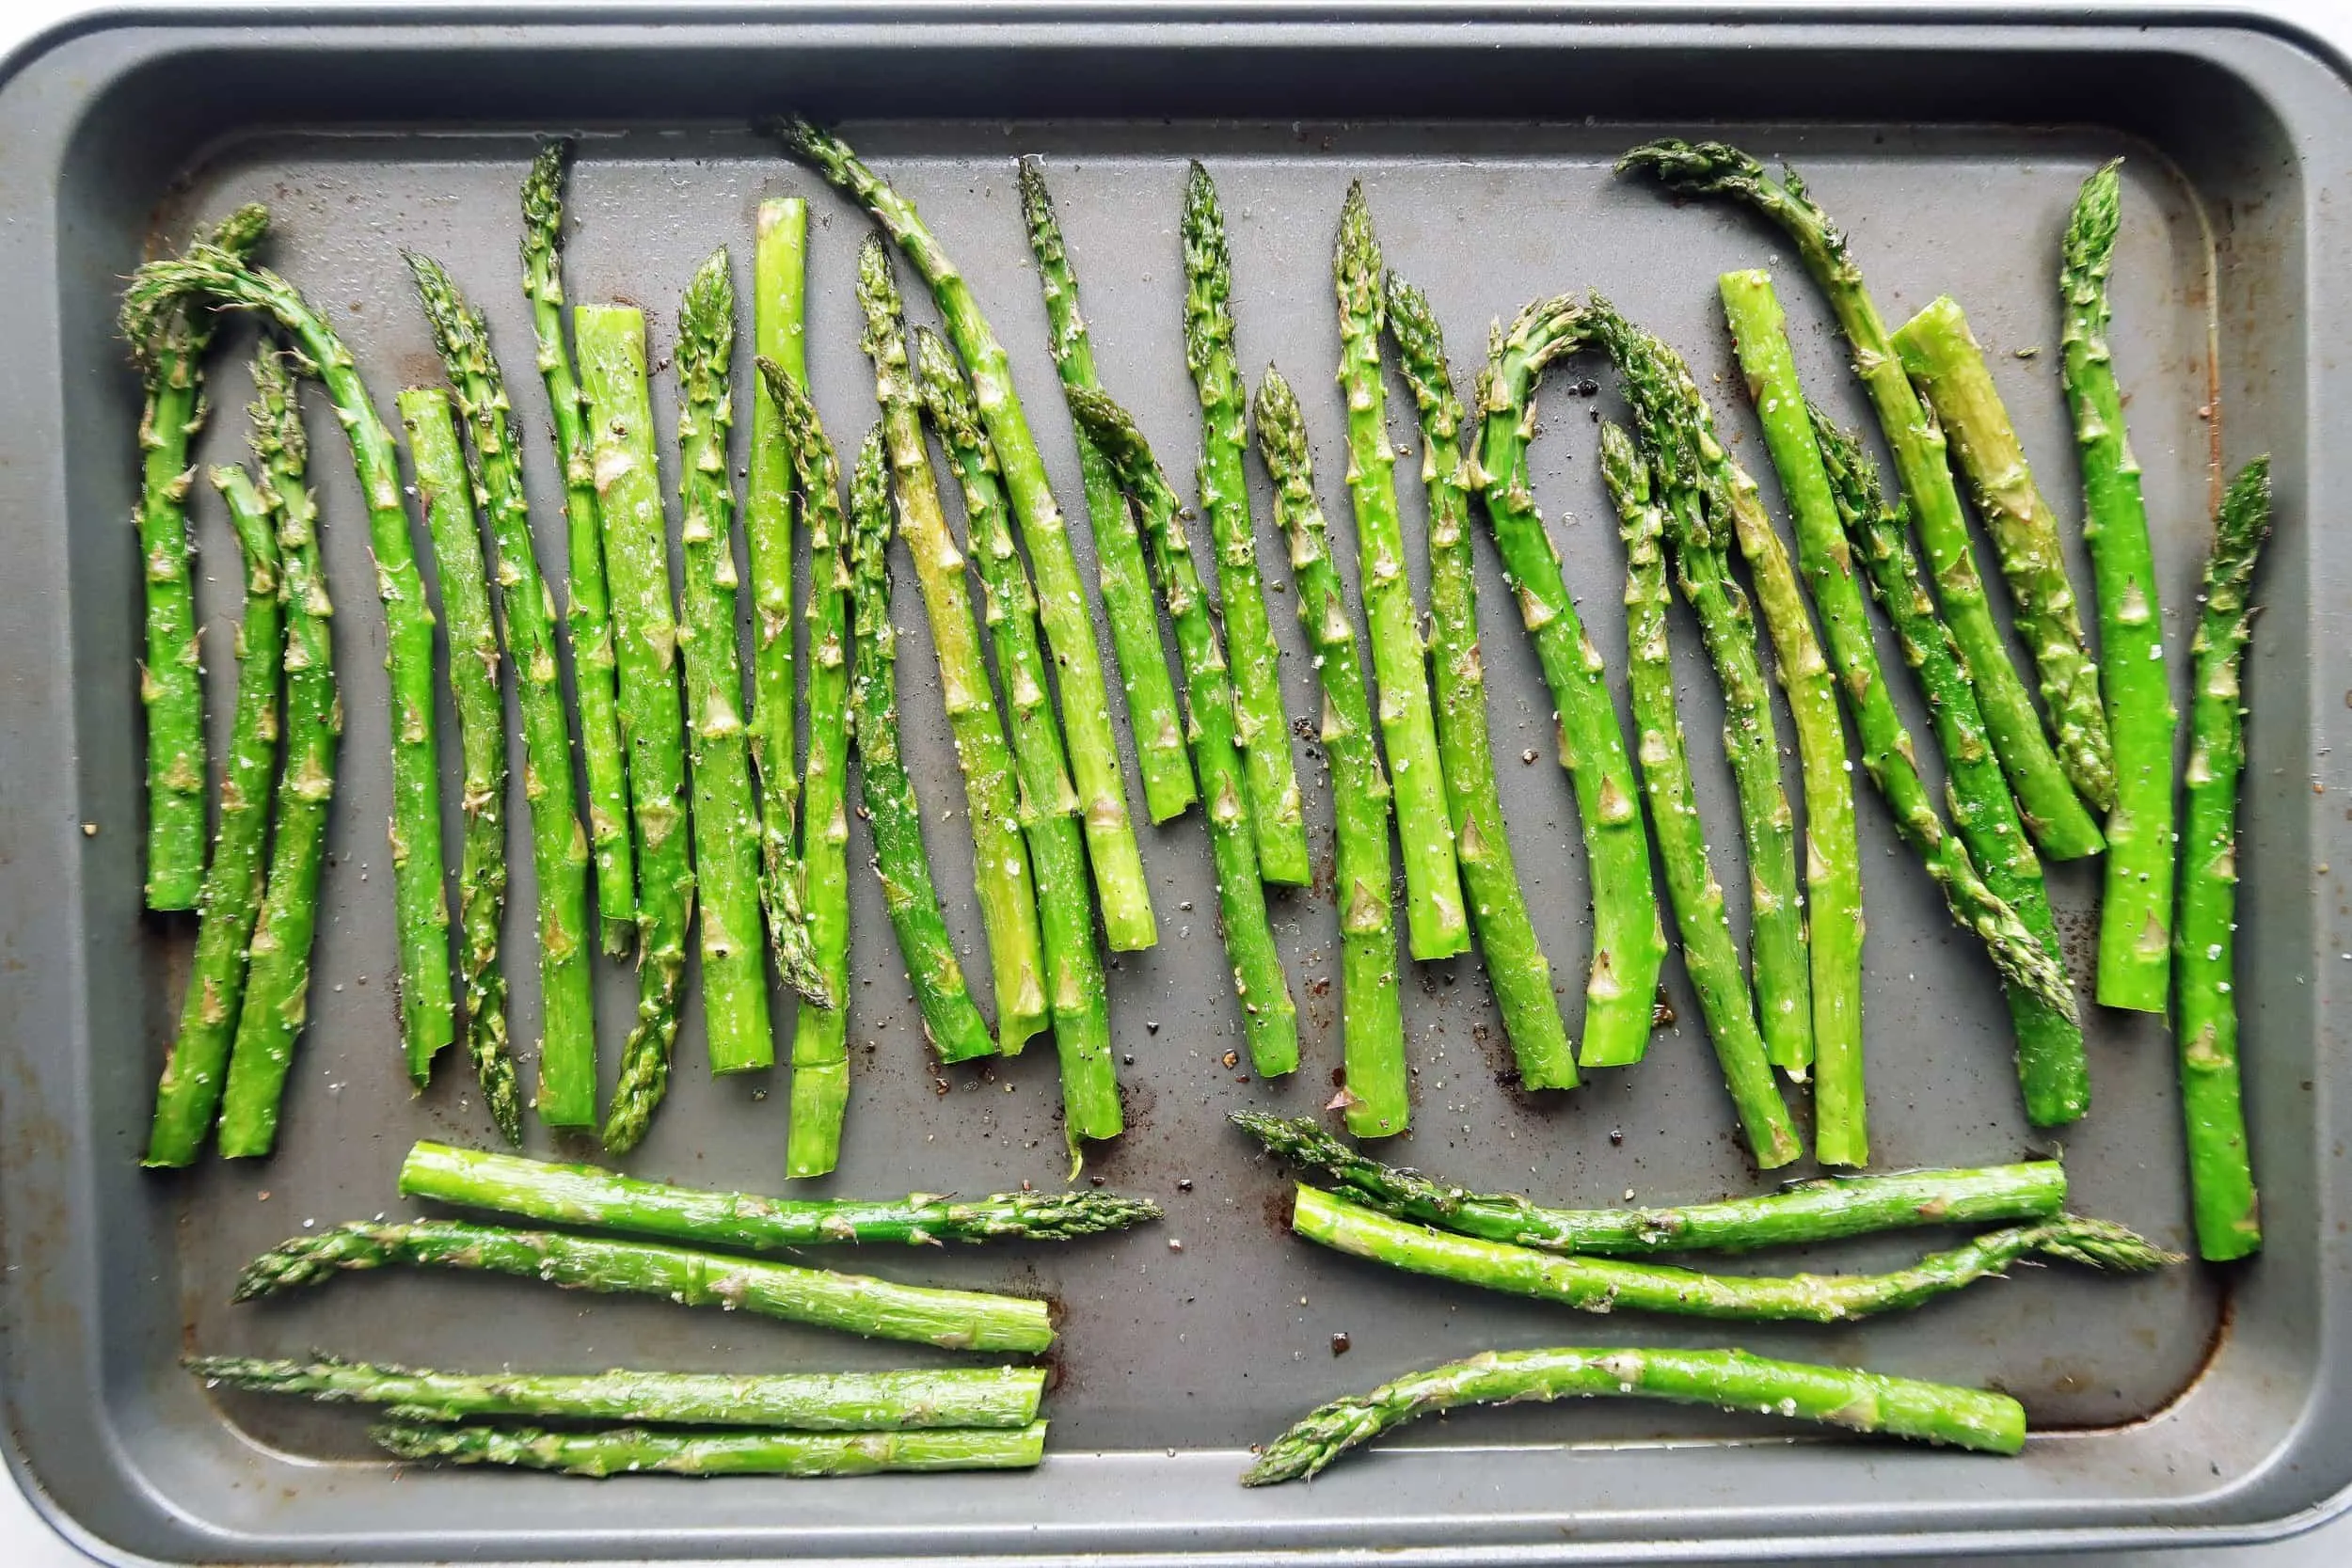 Asparagus coated with olive oil, salt, and pepper, lined up on a sheet pan, ready for roasting.